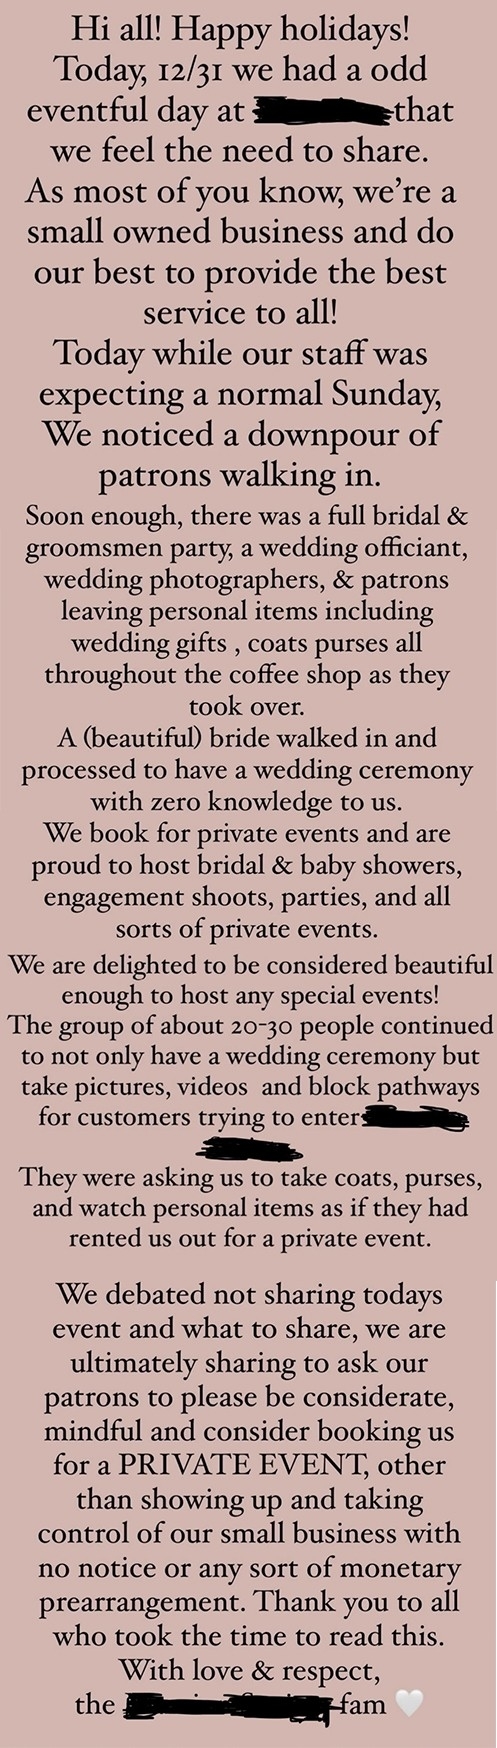 Image summarizing a text-heavy holiday announcement from a bridal shop, mentioning adjusted hours, staff patronage, and appreciation for support